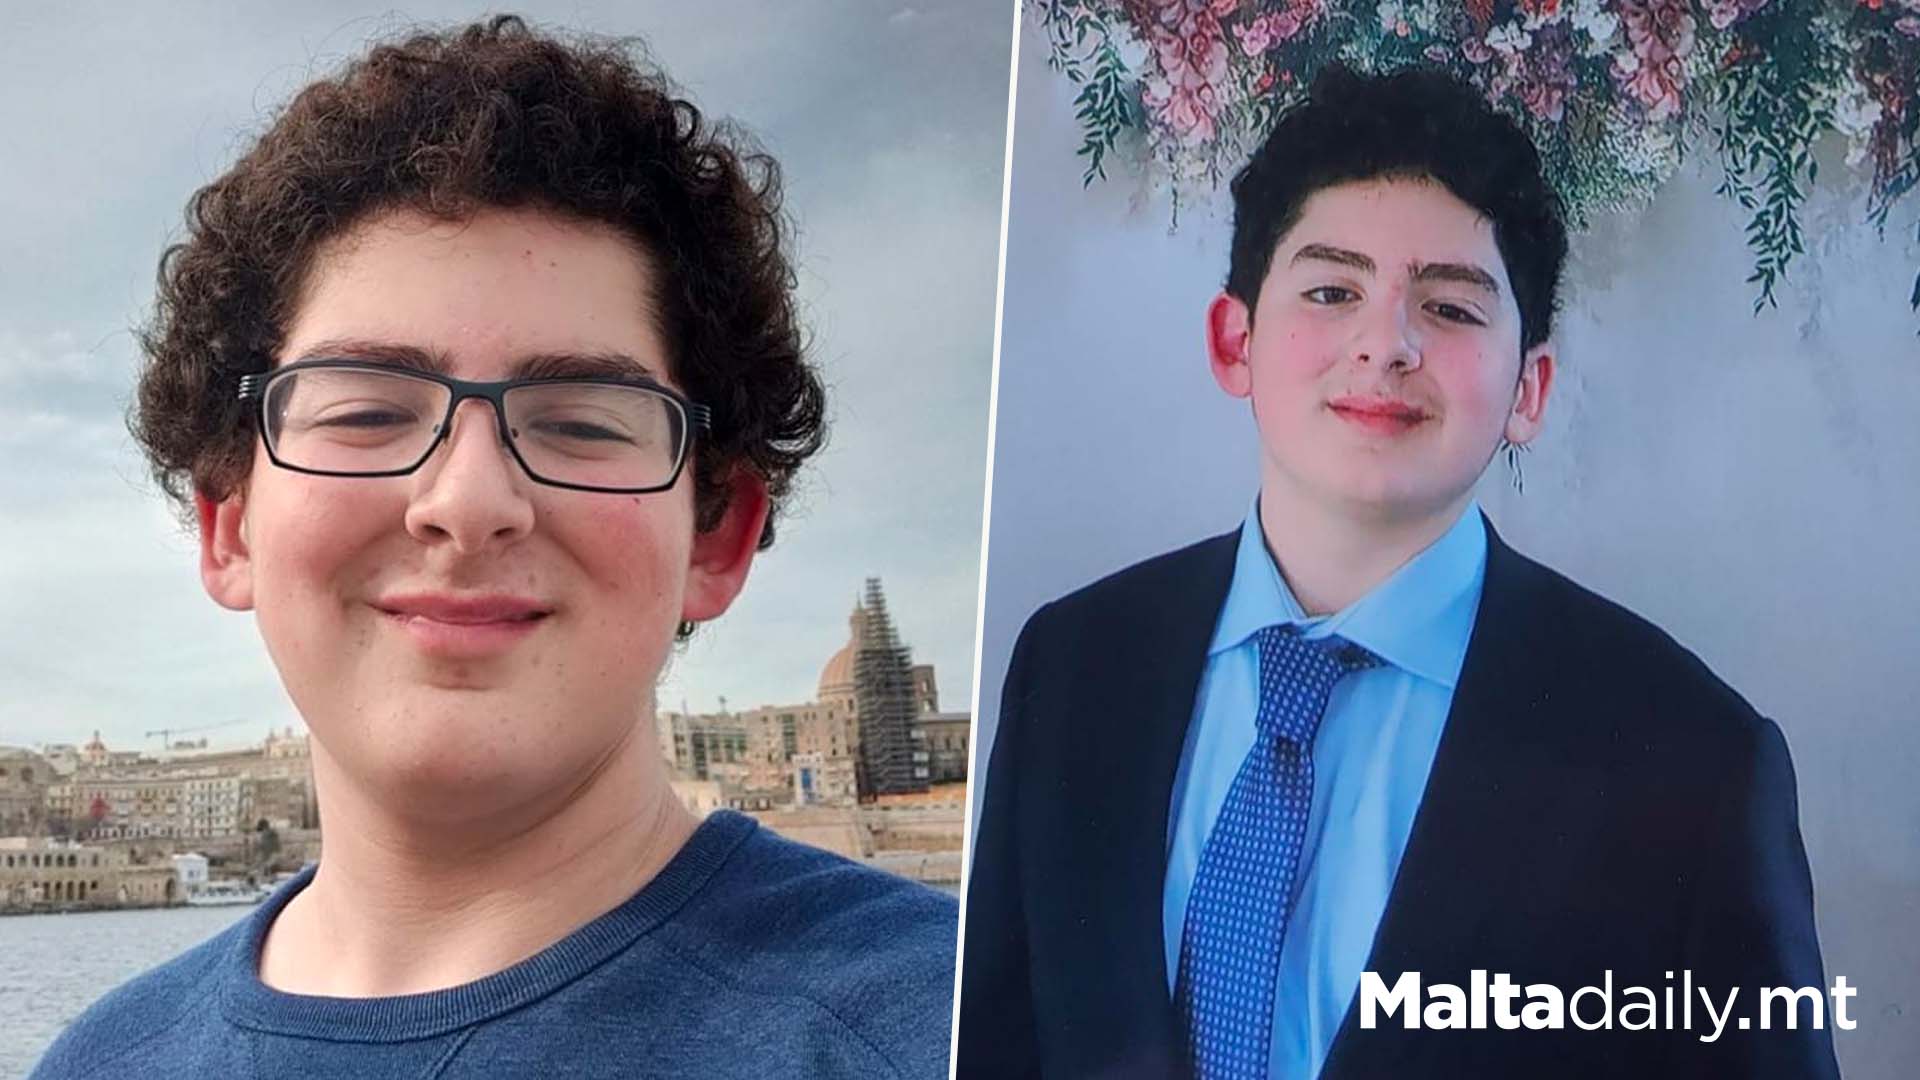 Malta's Youngest Ever Local Council Candidate At 15 Years Old